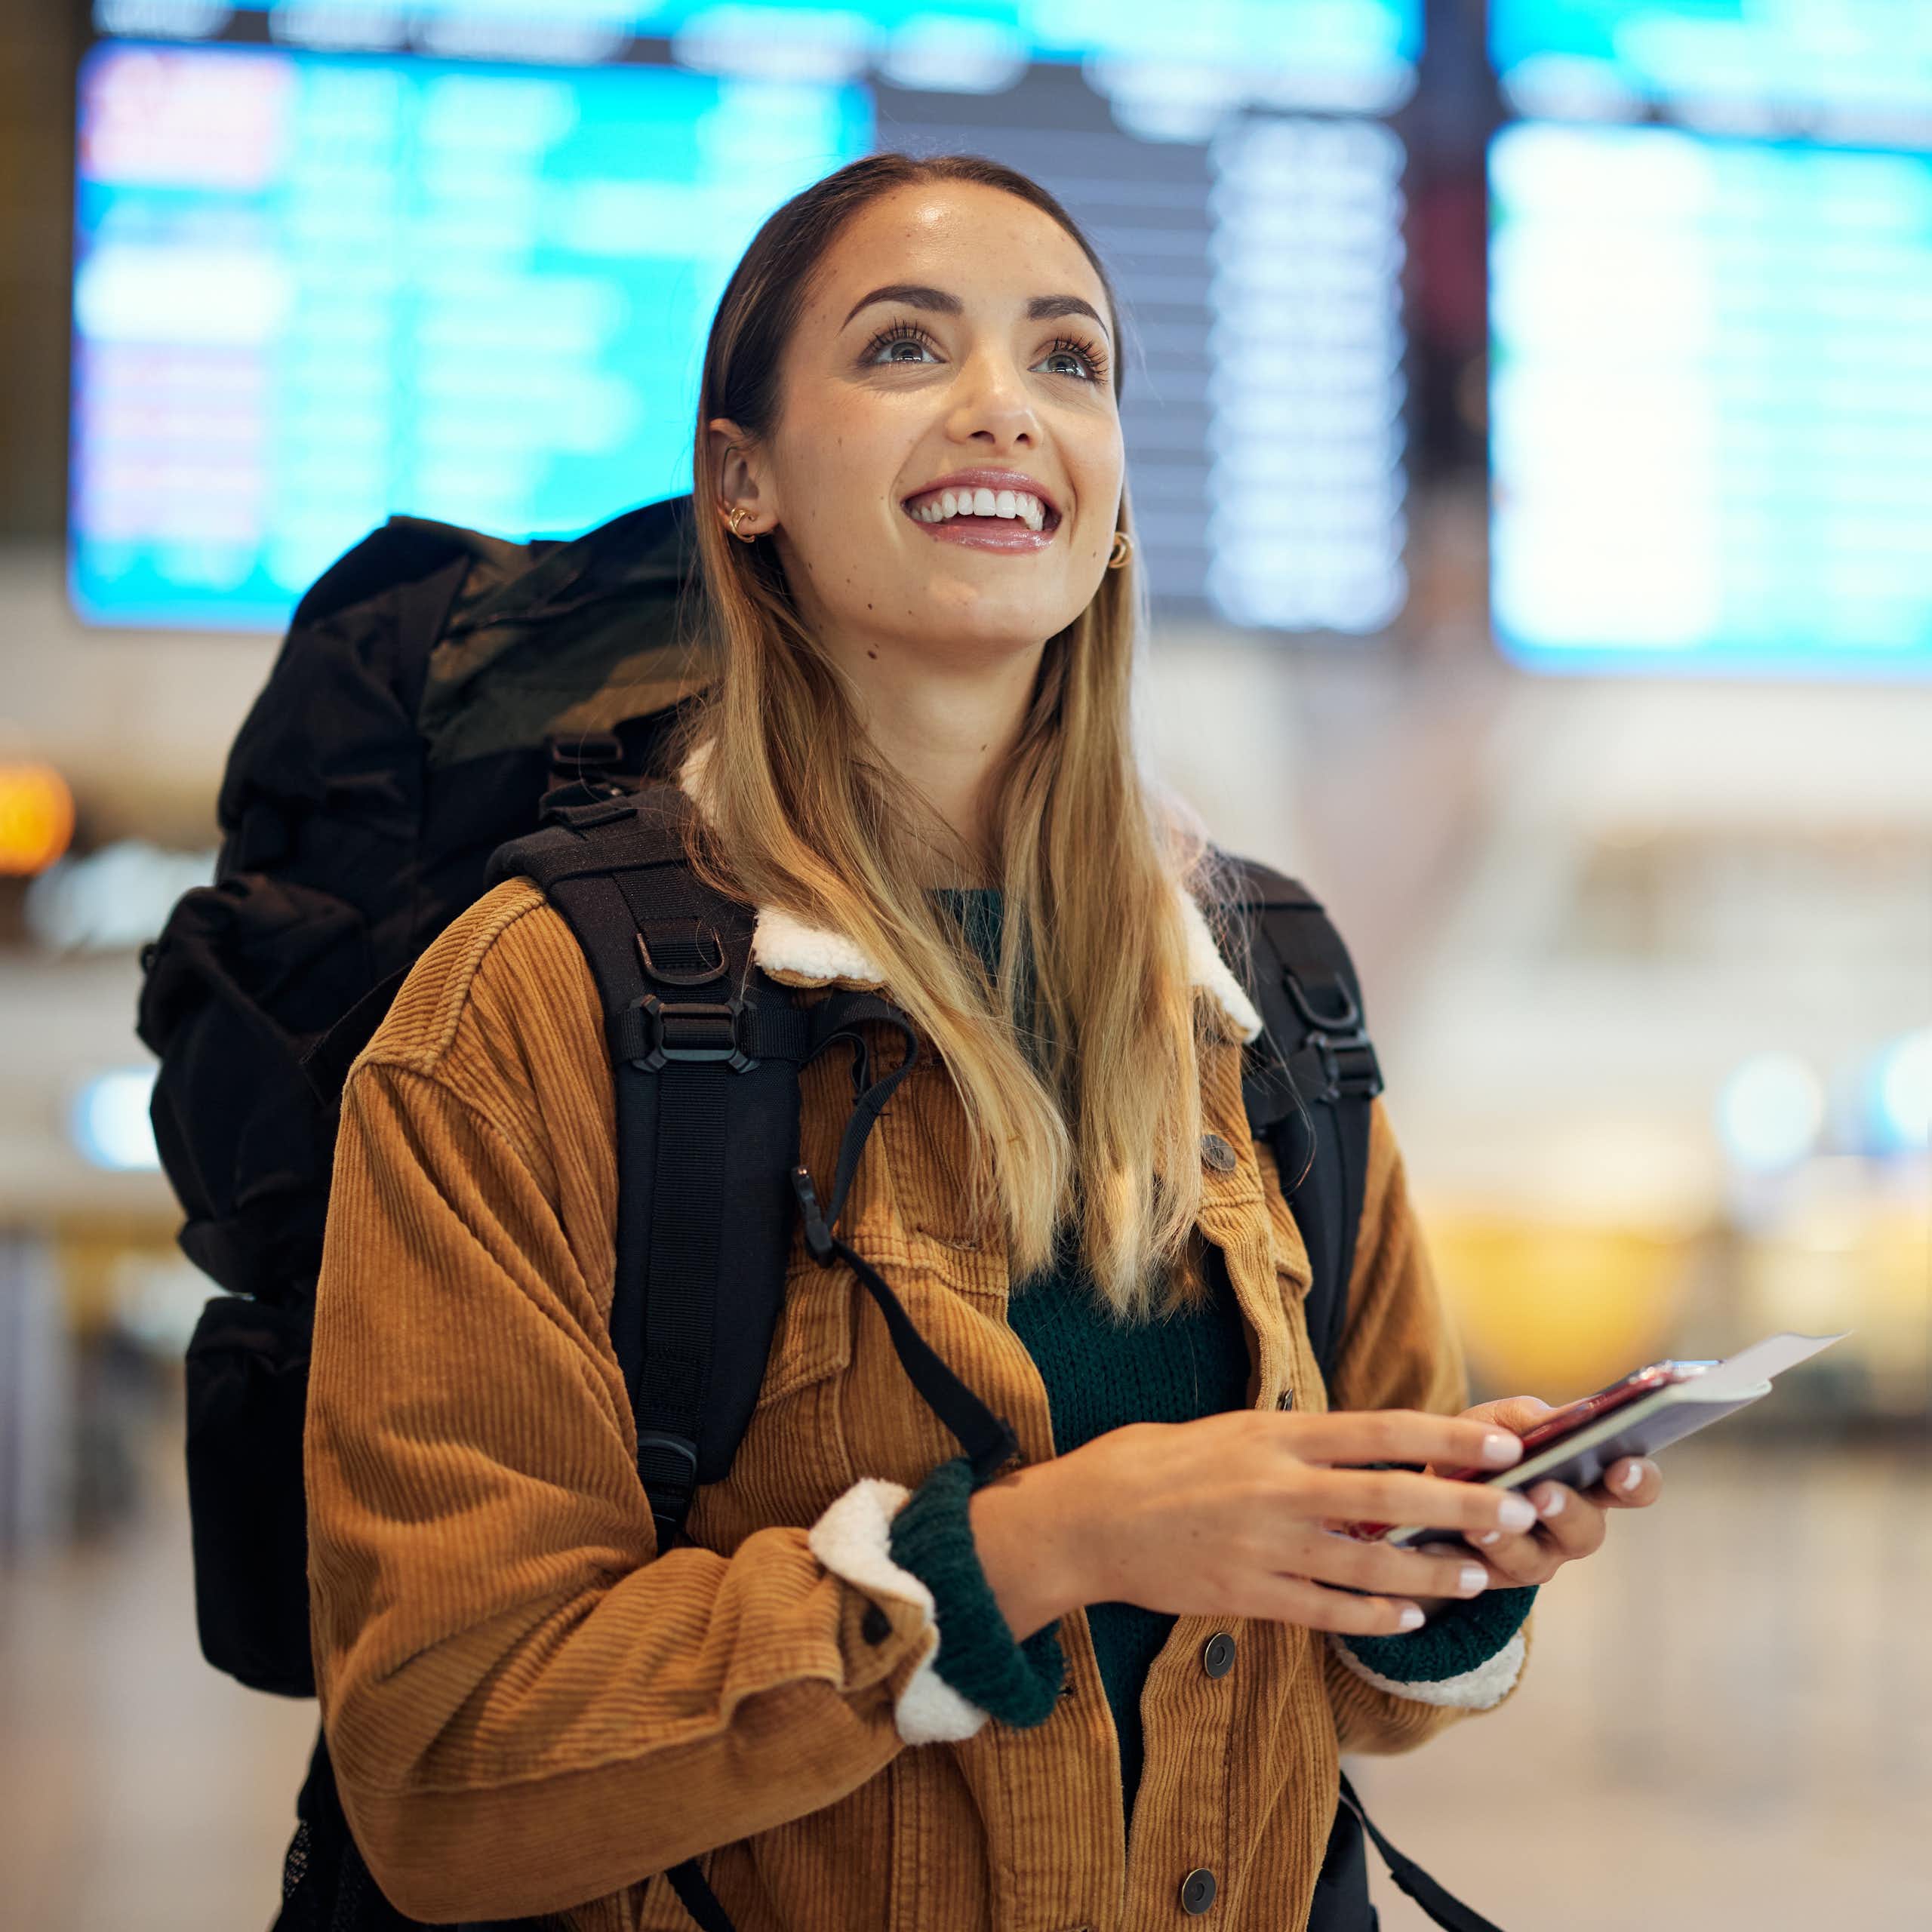 A young woman wearing a backpack and holding her passport smiles up at a screen in an airport